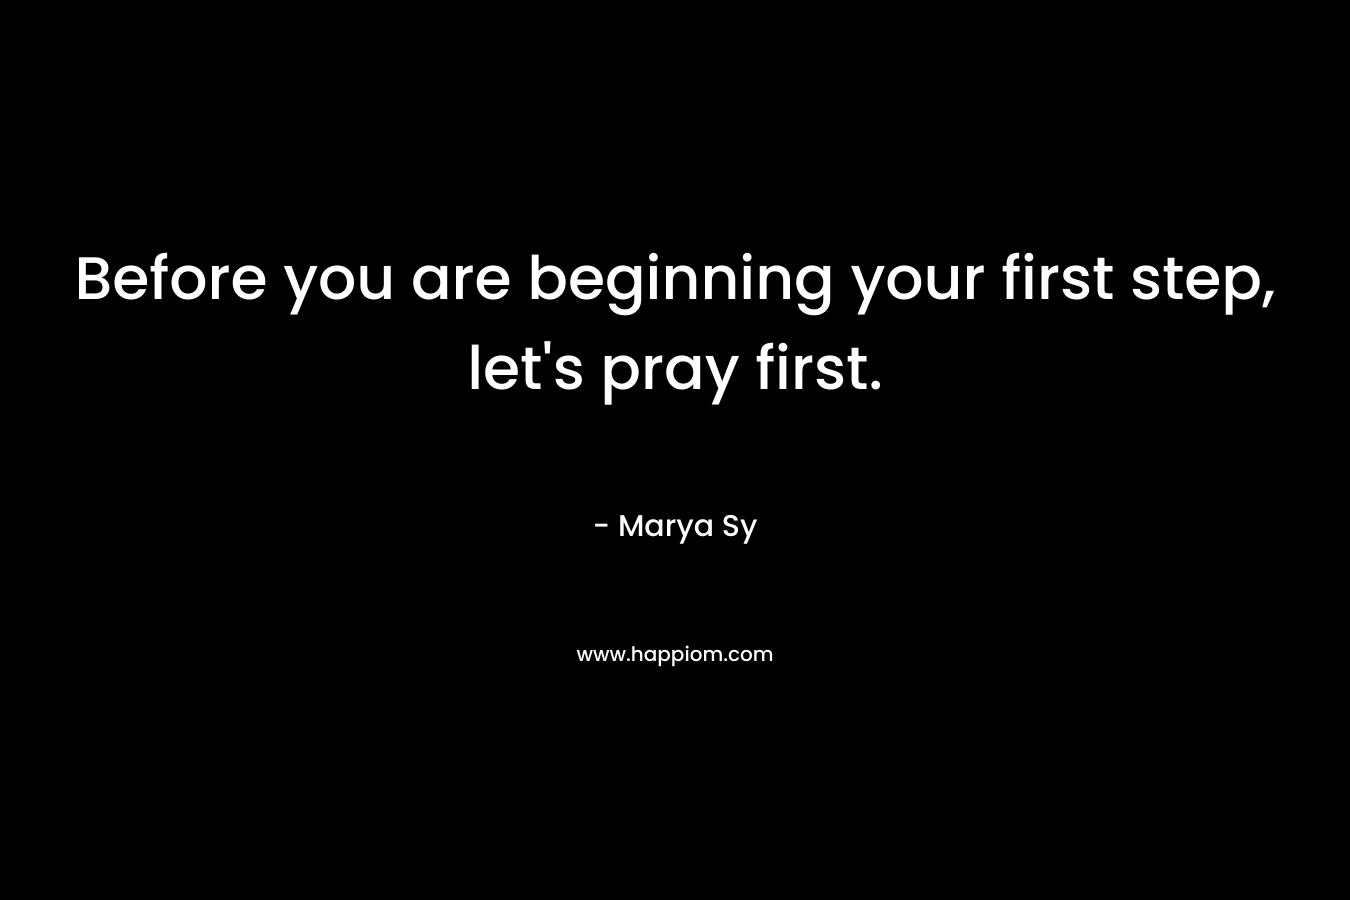 Before you are beginning your first step, let’s pray first. – Marya Sy